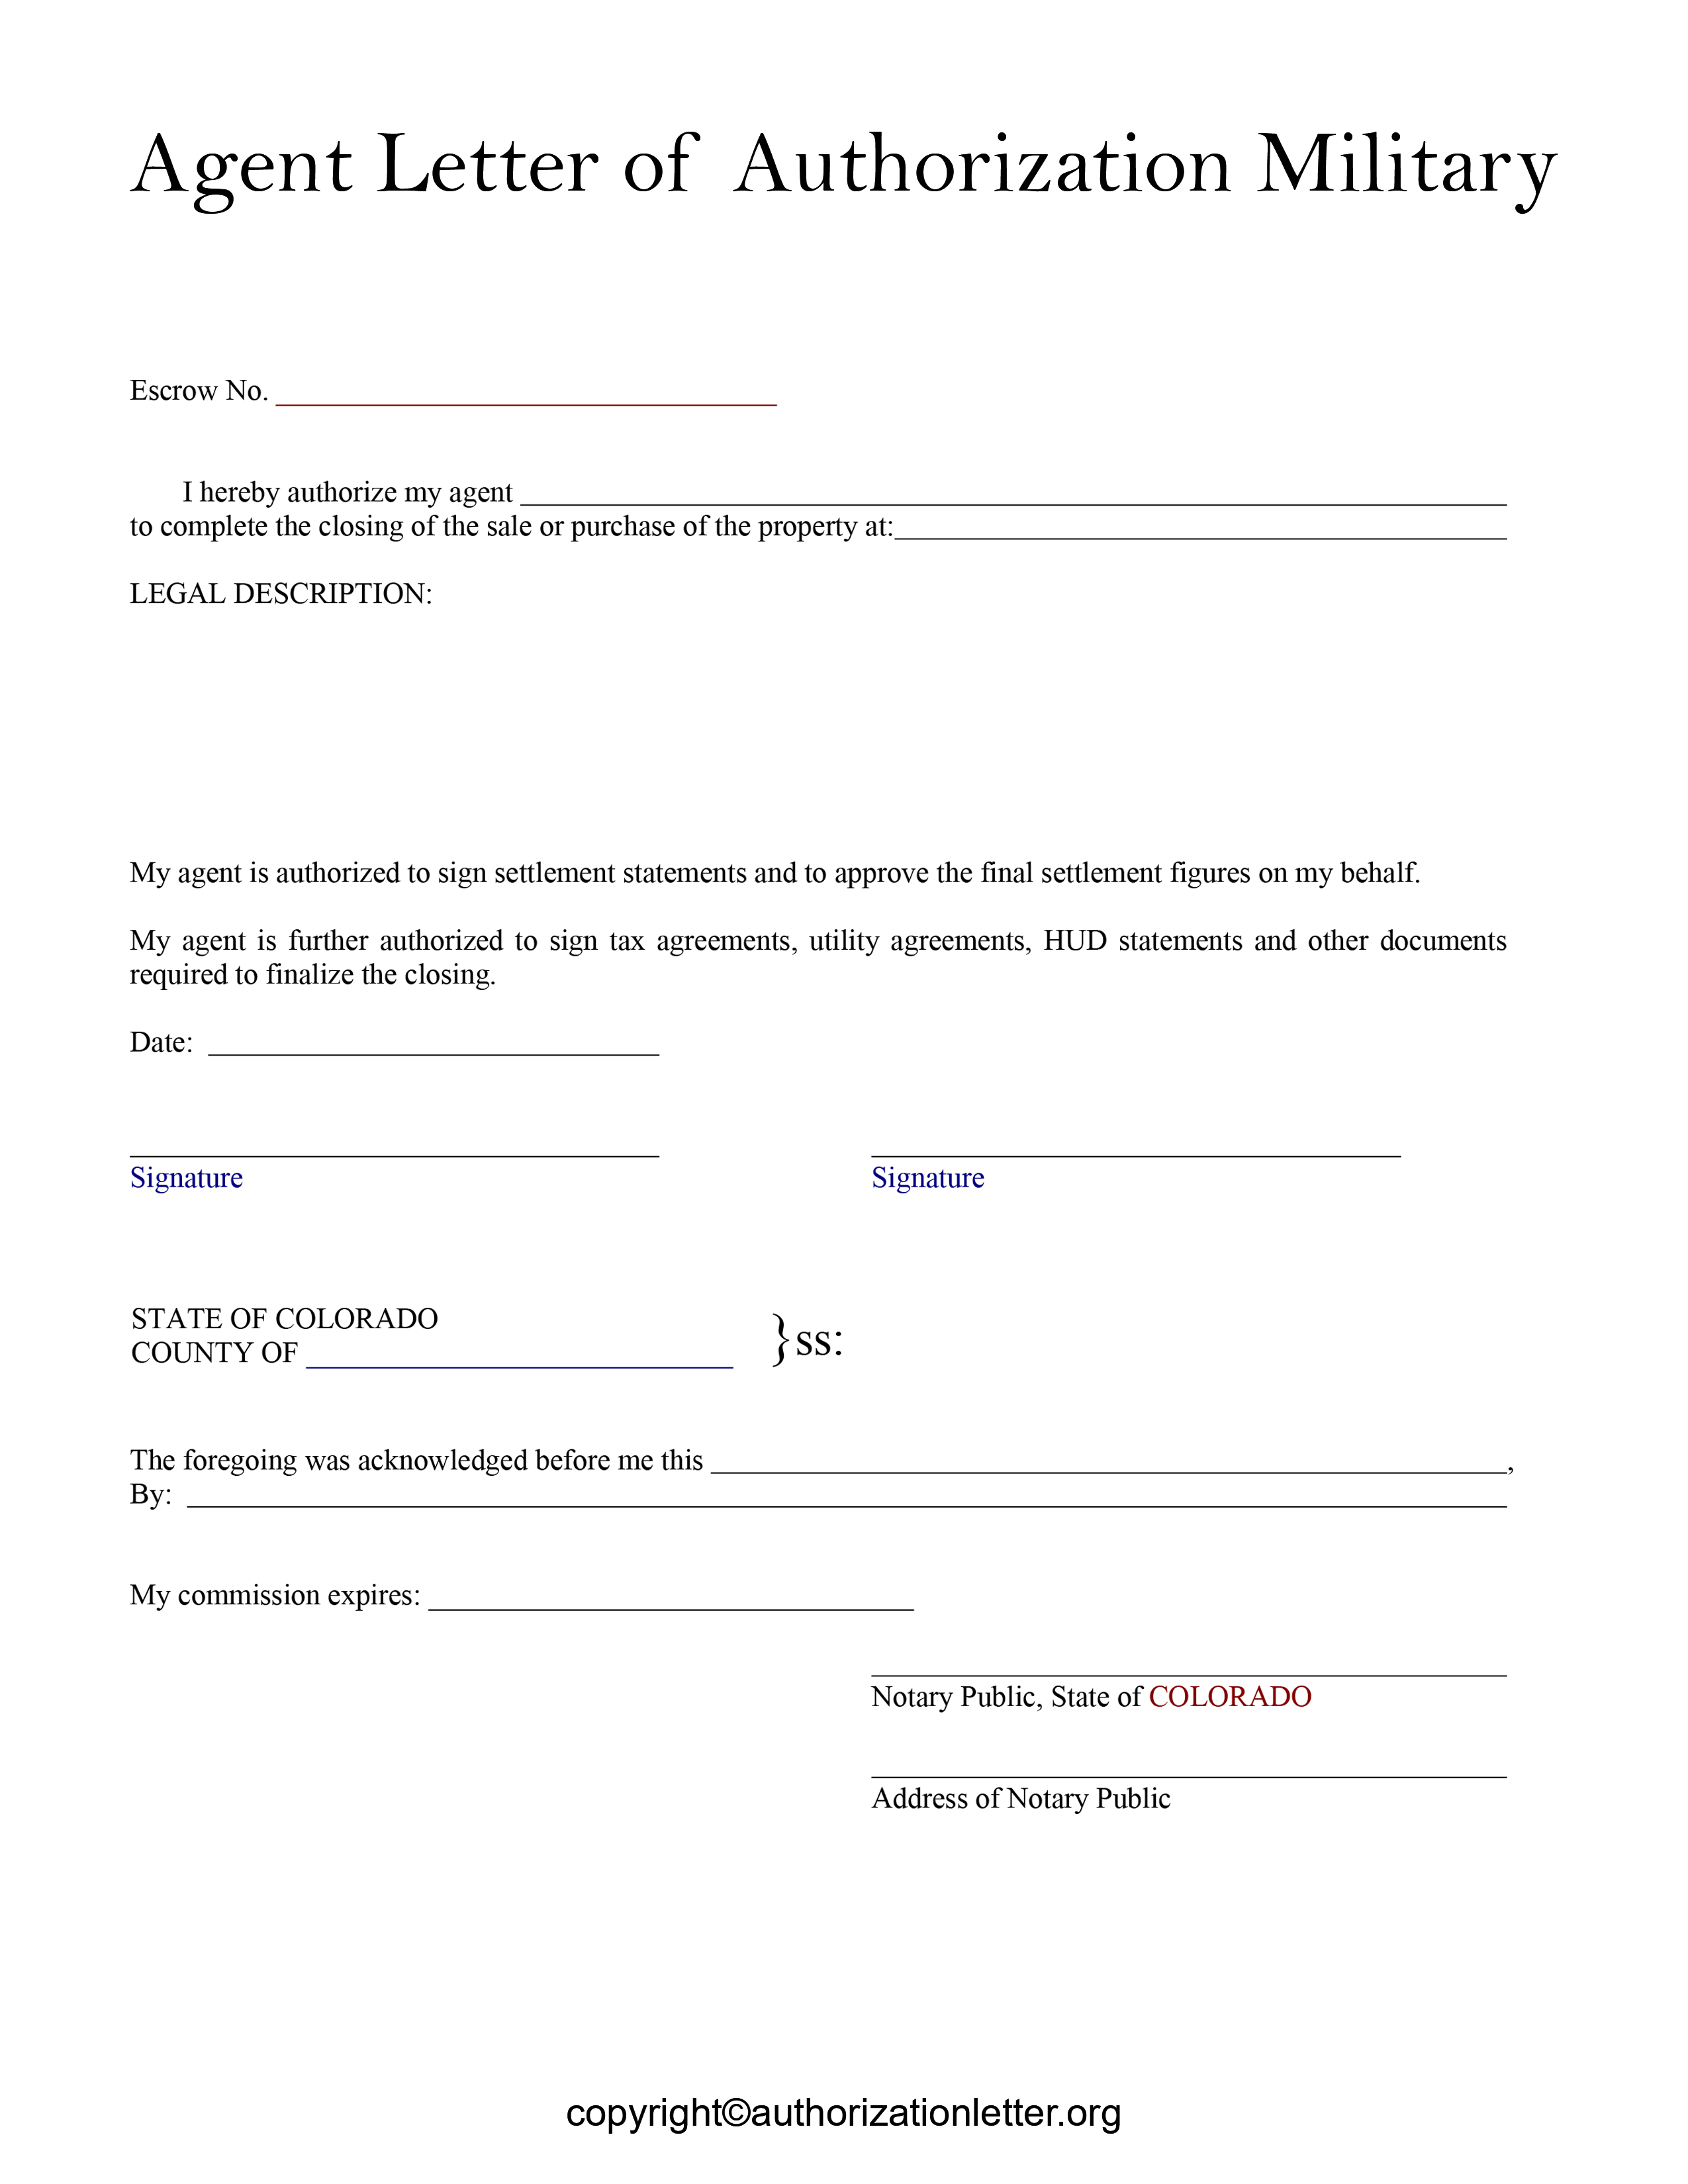 Free Agent Letter of Authorization Military Sample in PDF